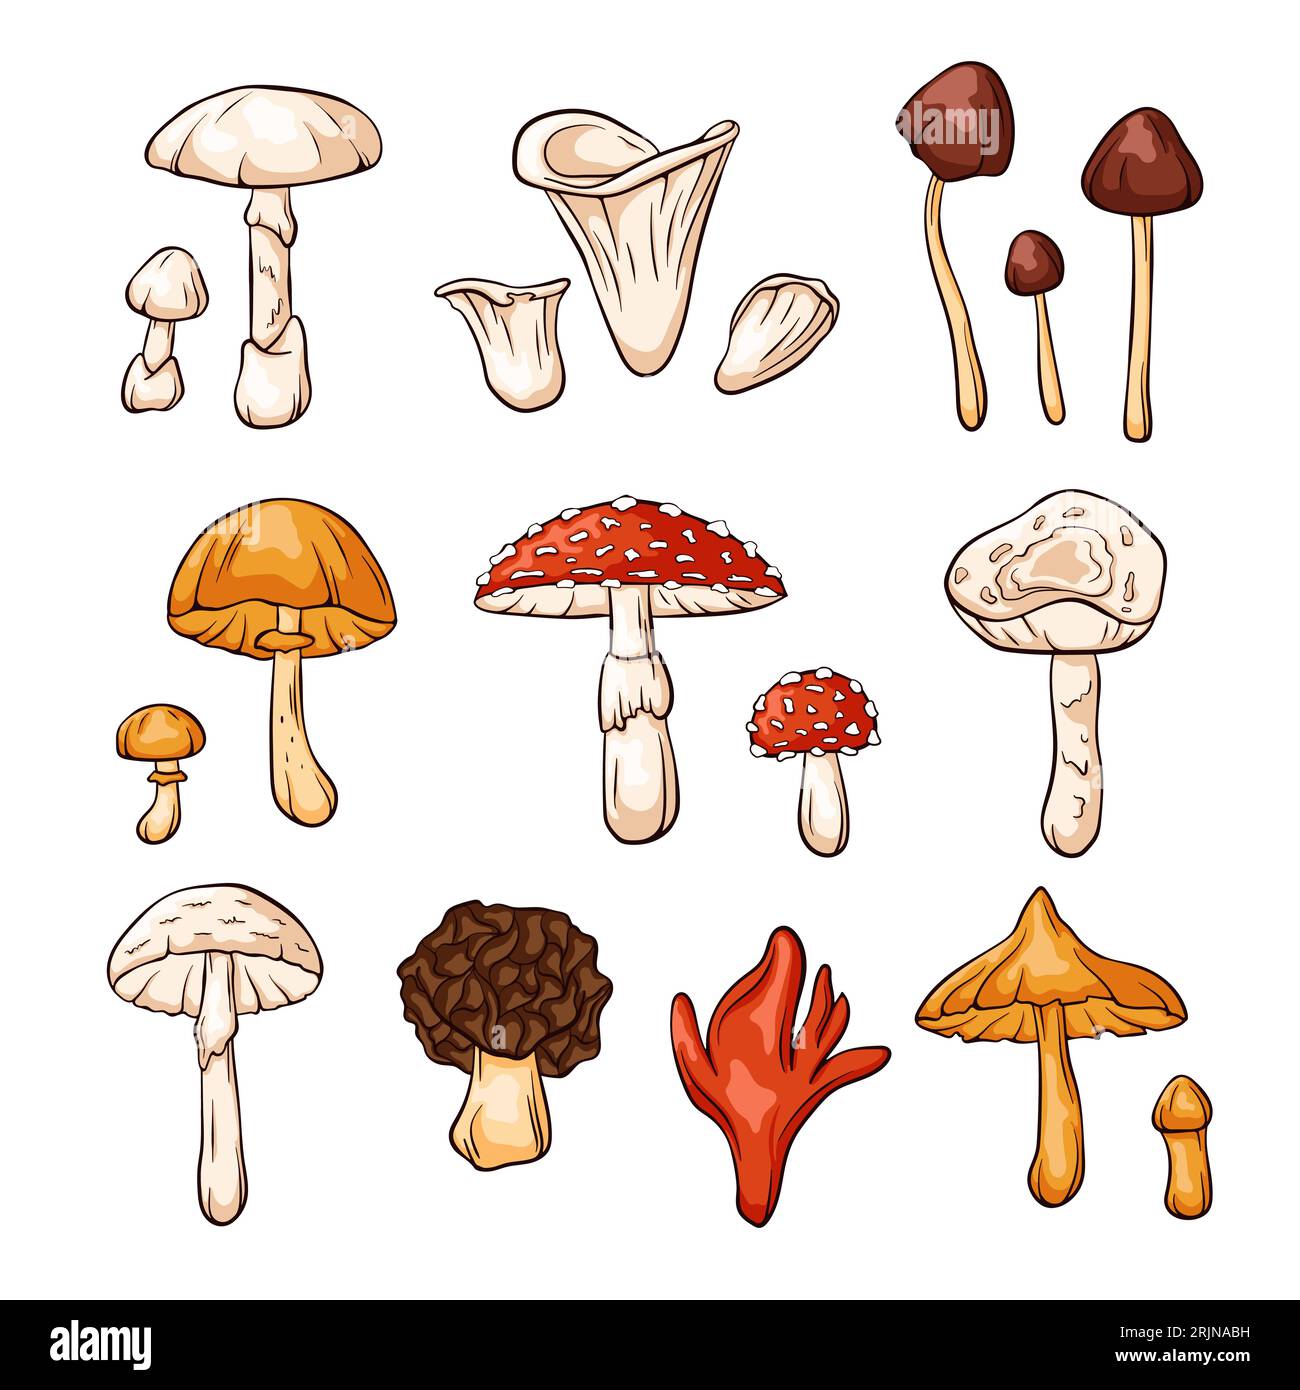 Hand drawn colorful inedible mushrooms collection in cartoon style. Fly Agaric, Autumn Skullcap, Deadly Webcap, False Morel, Poison fire coral. Vector Stock Vector